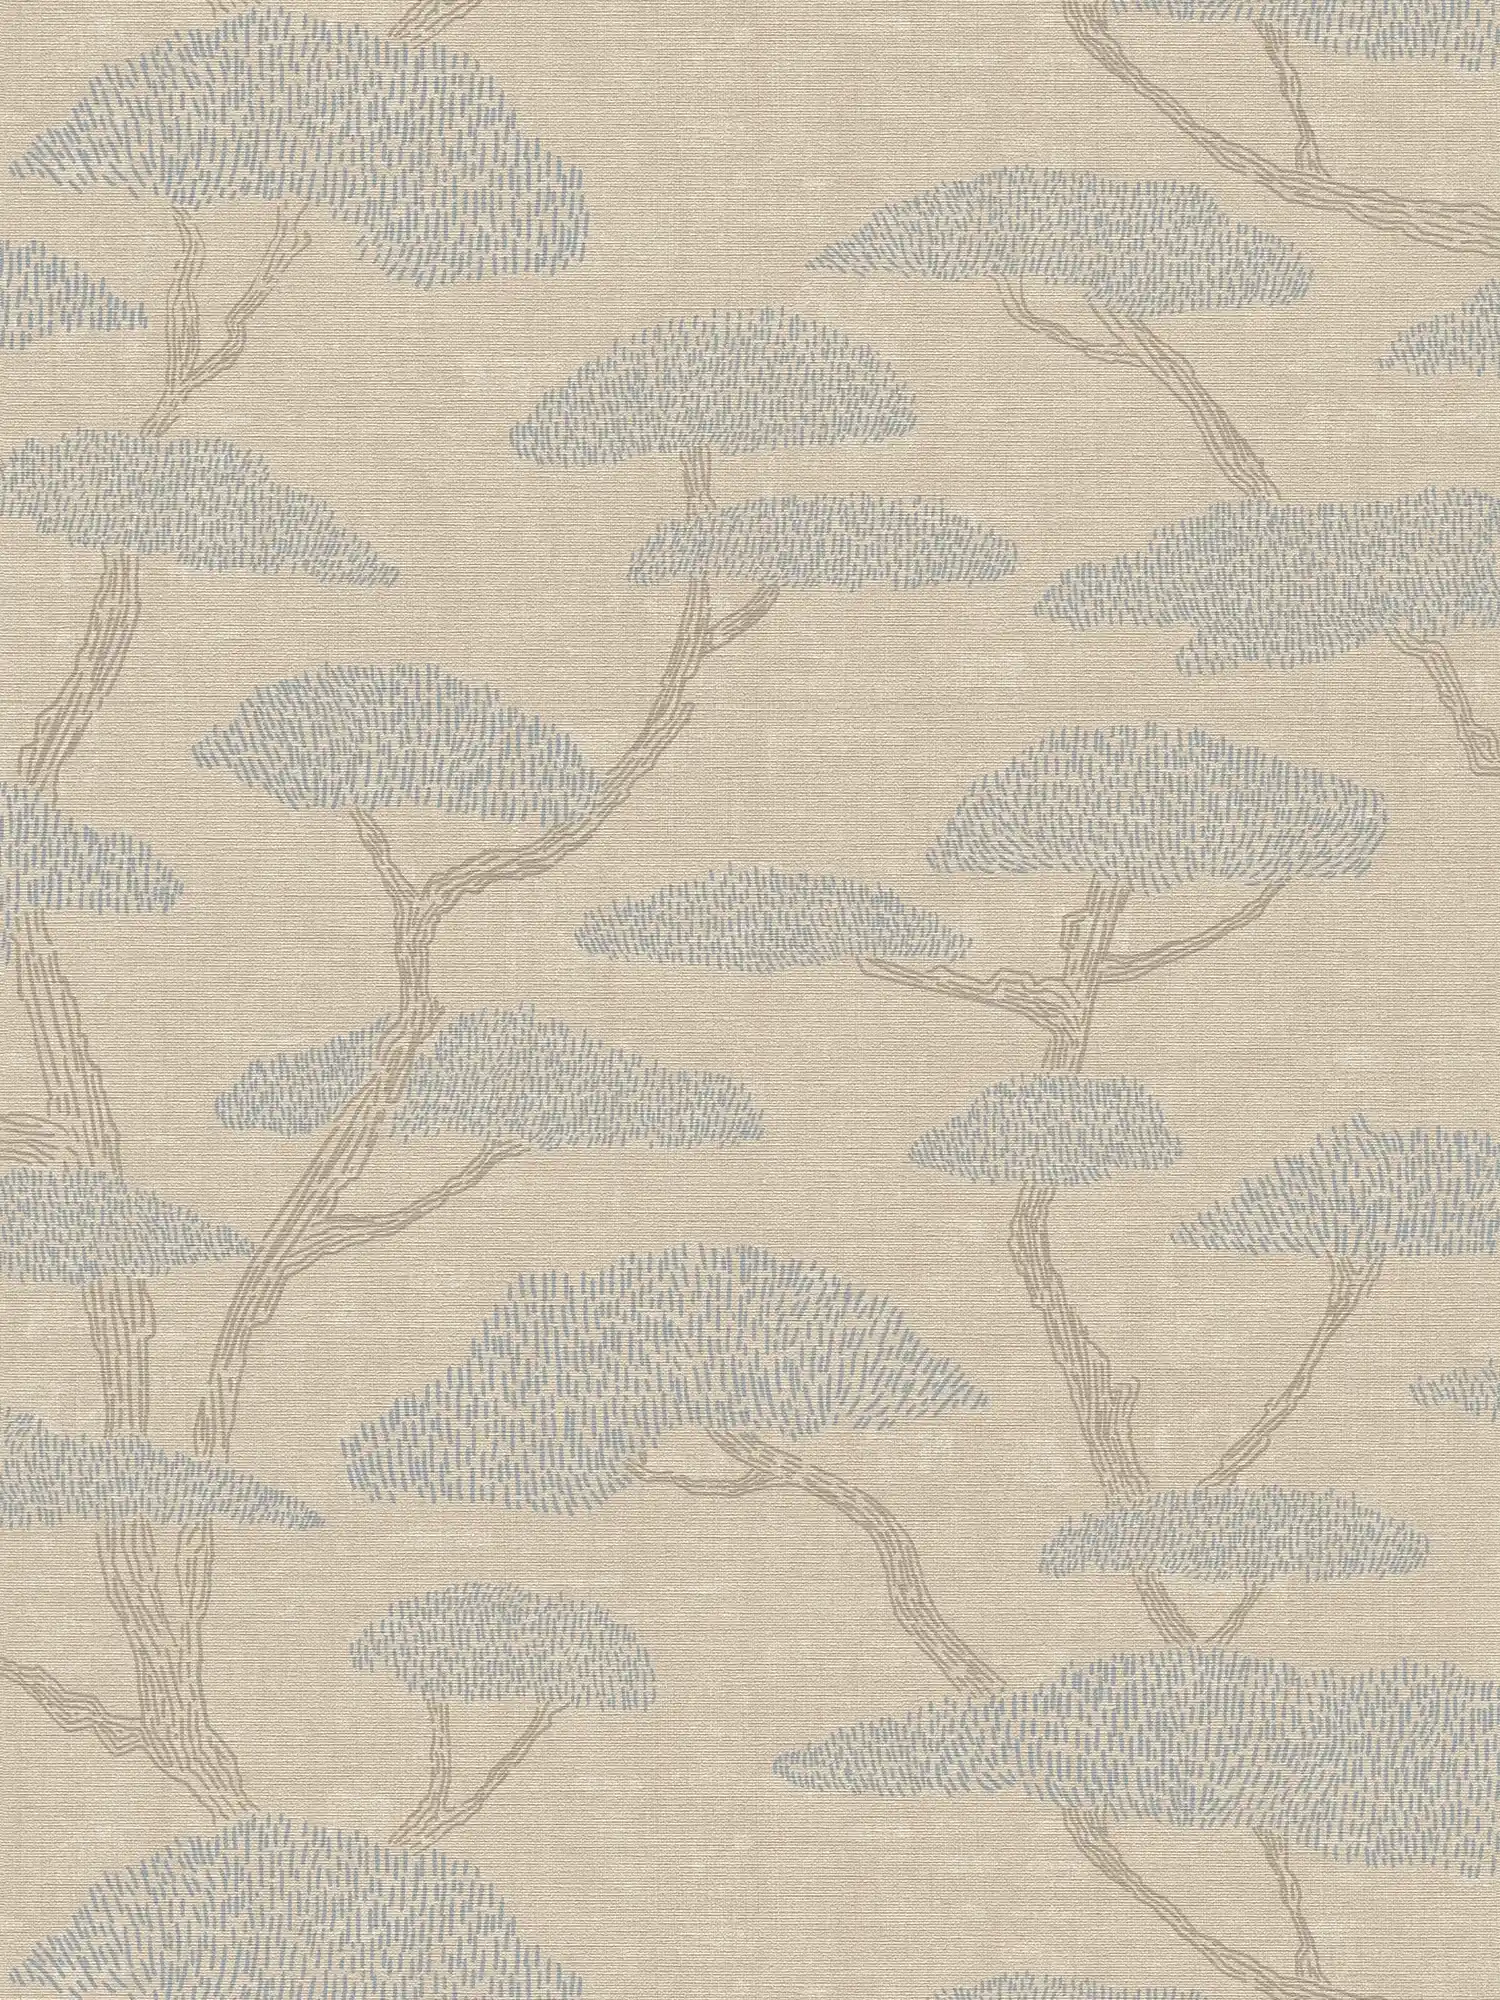 Beige wallpaper with abstract pine tree pattern
